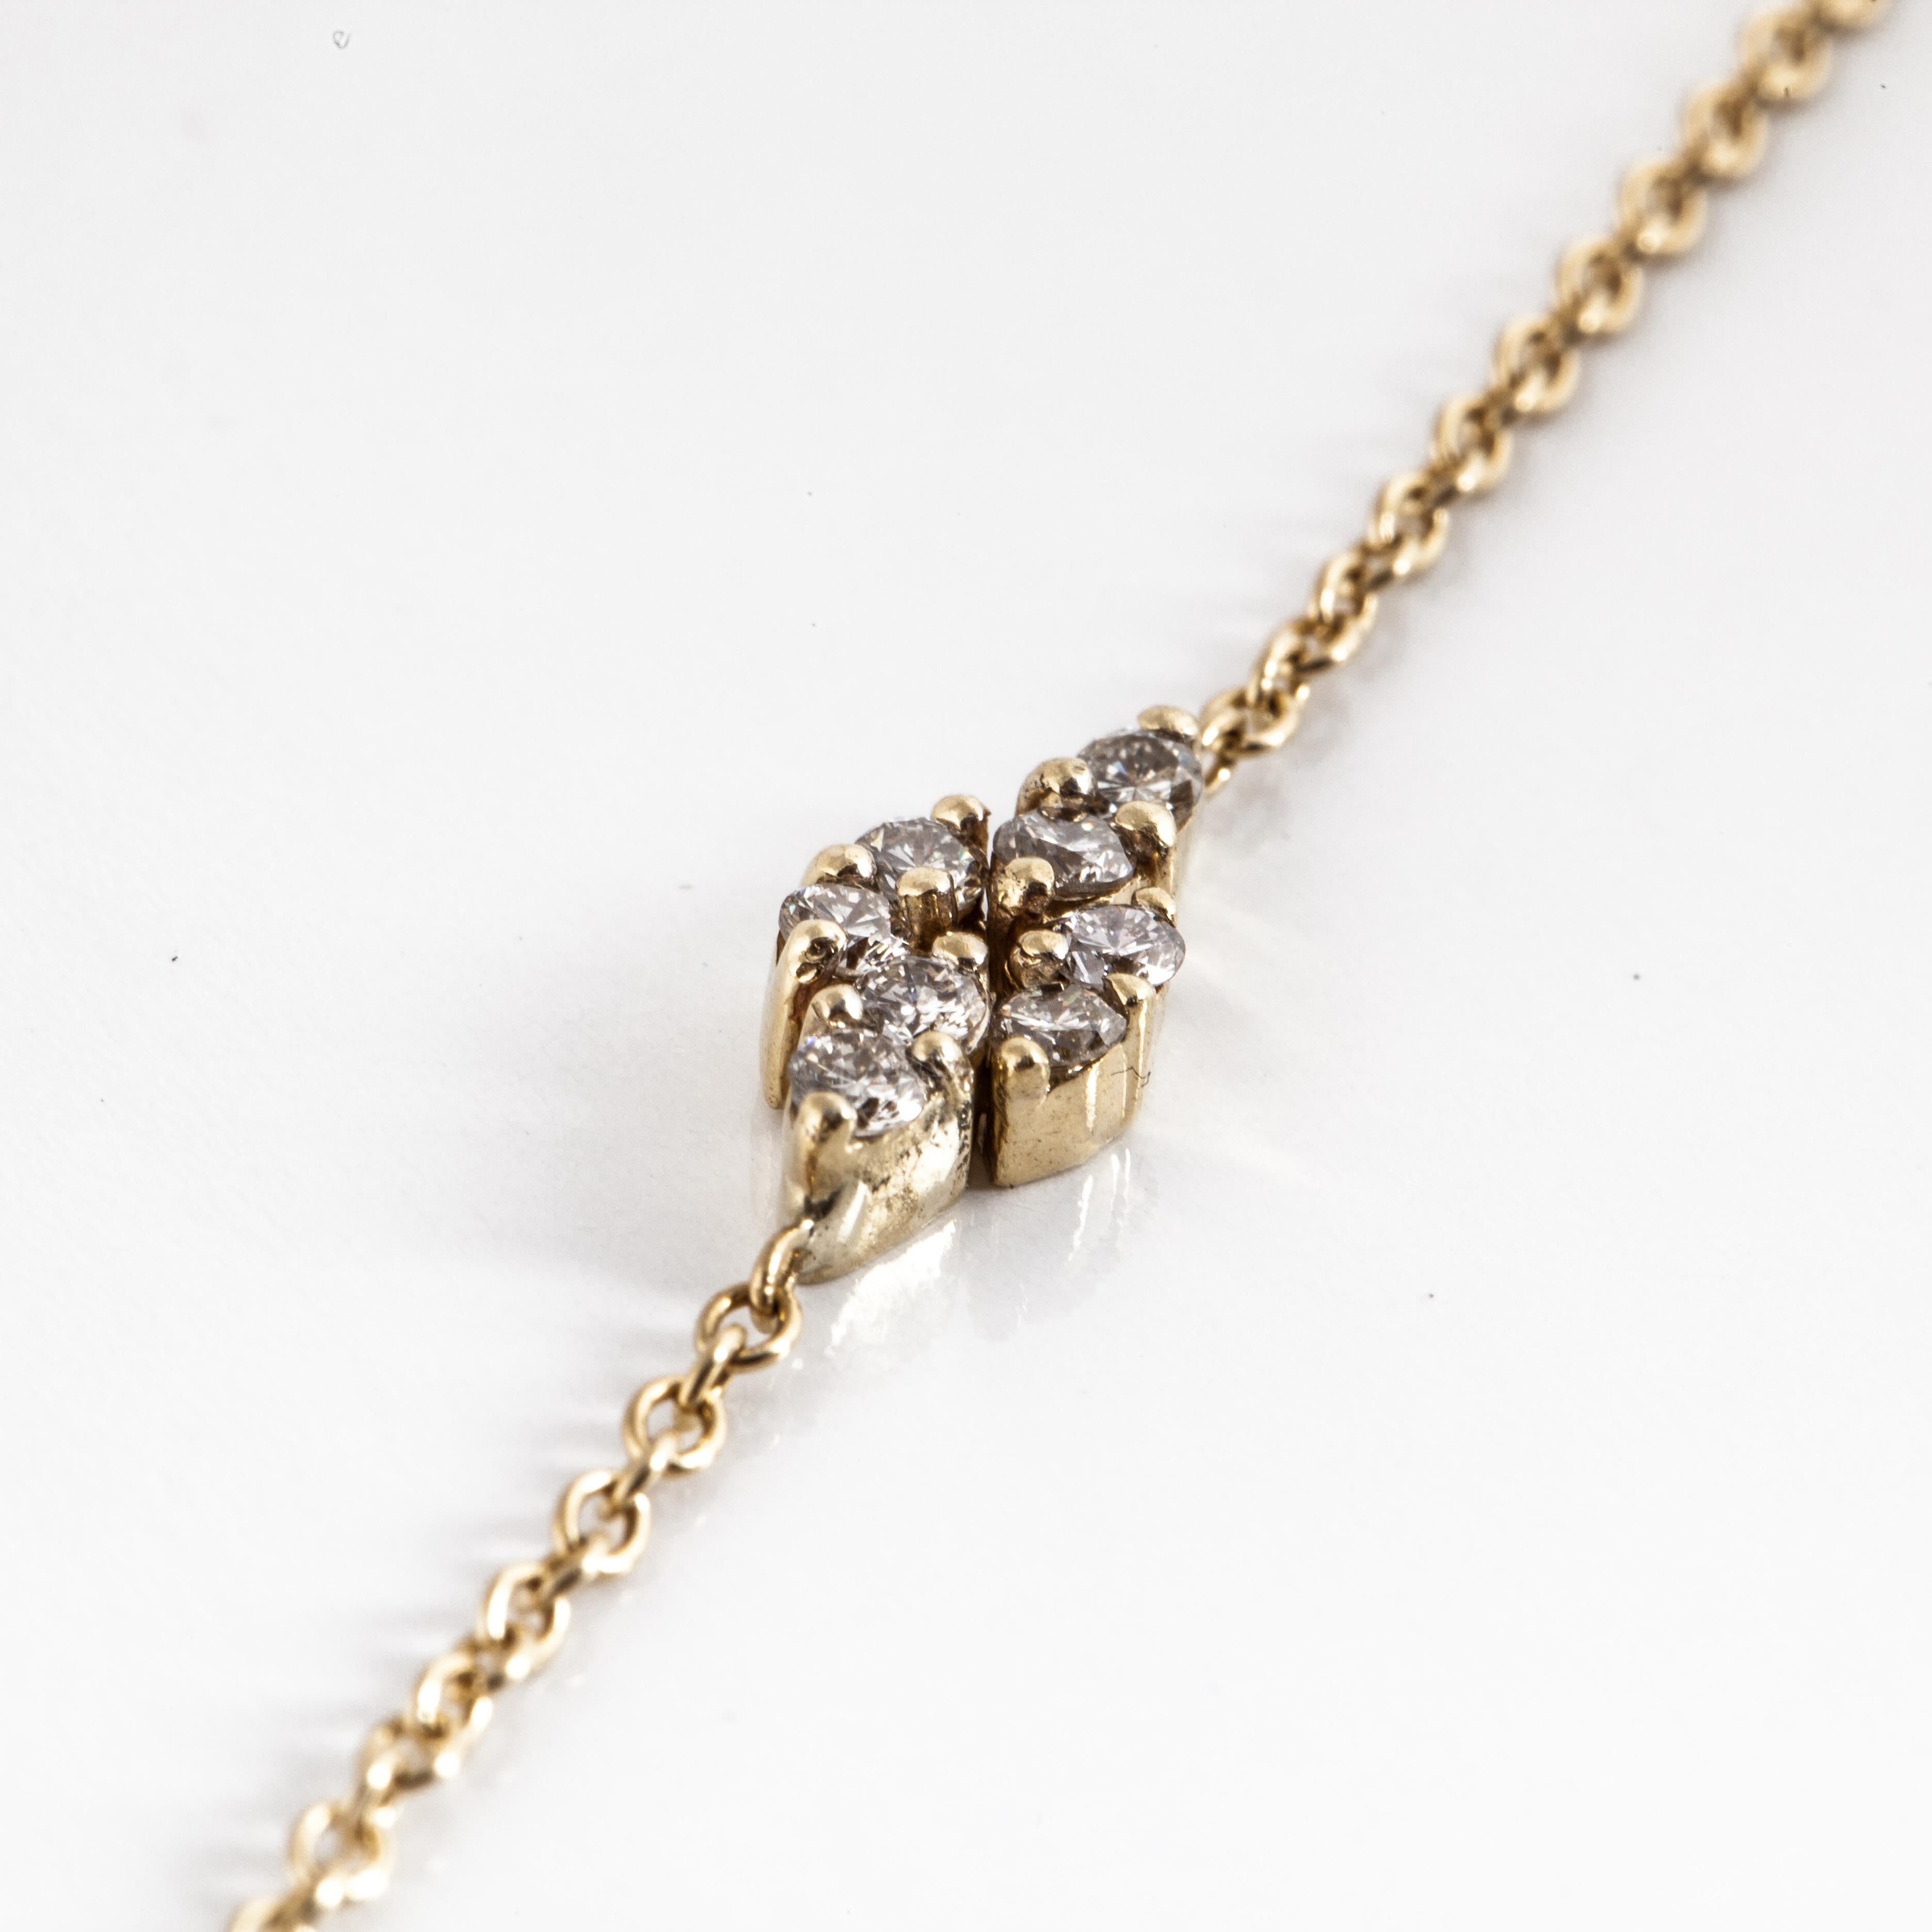 18K yellow gold thin chain with diamond stations.  Each station measures 3/8 inches long and 1/4 inch wide.  There are a total of 176 round brilliant-cut diamonds that total 6.10 carats; G-H color, VS12-VS2 clarity.  The chain measures 44 inches in